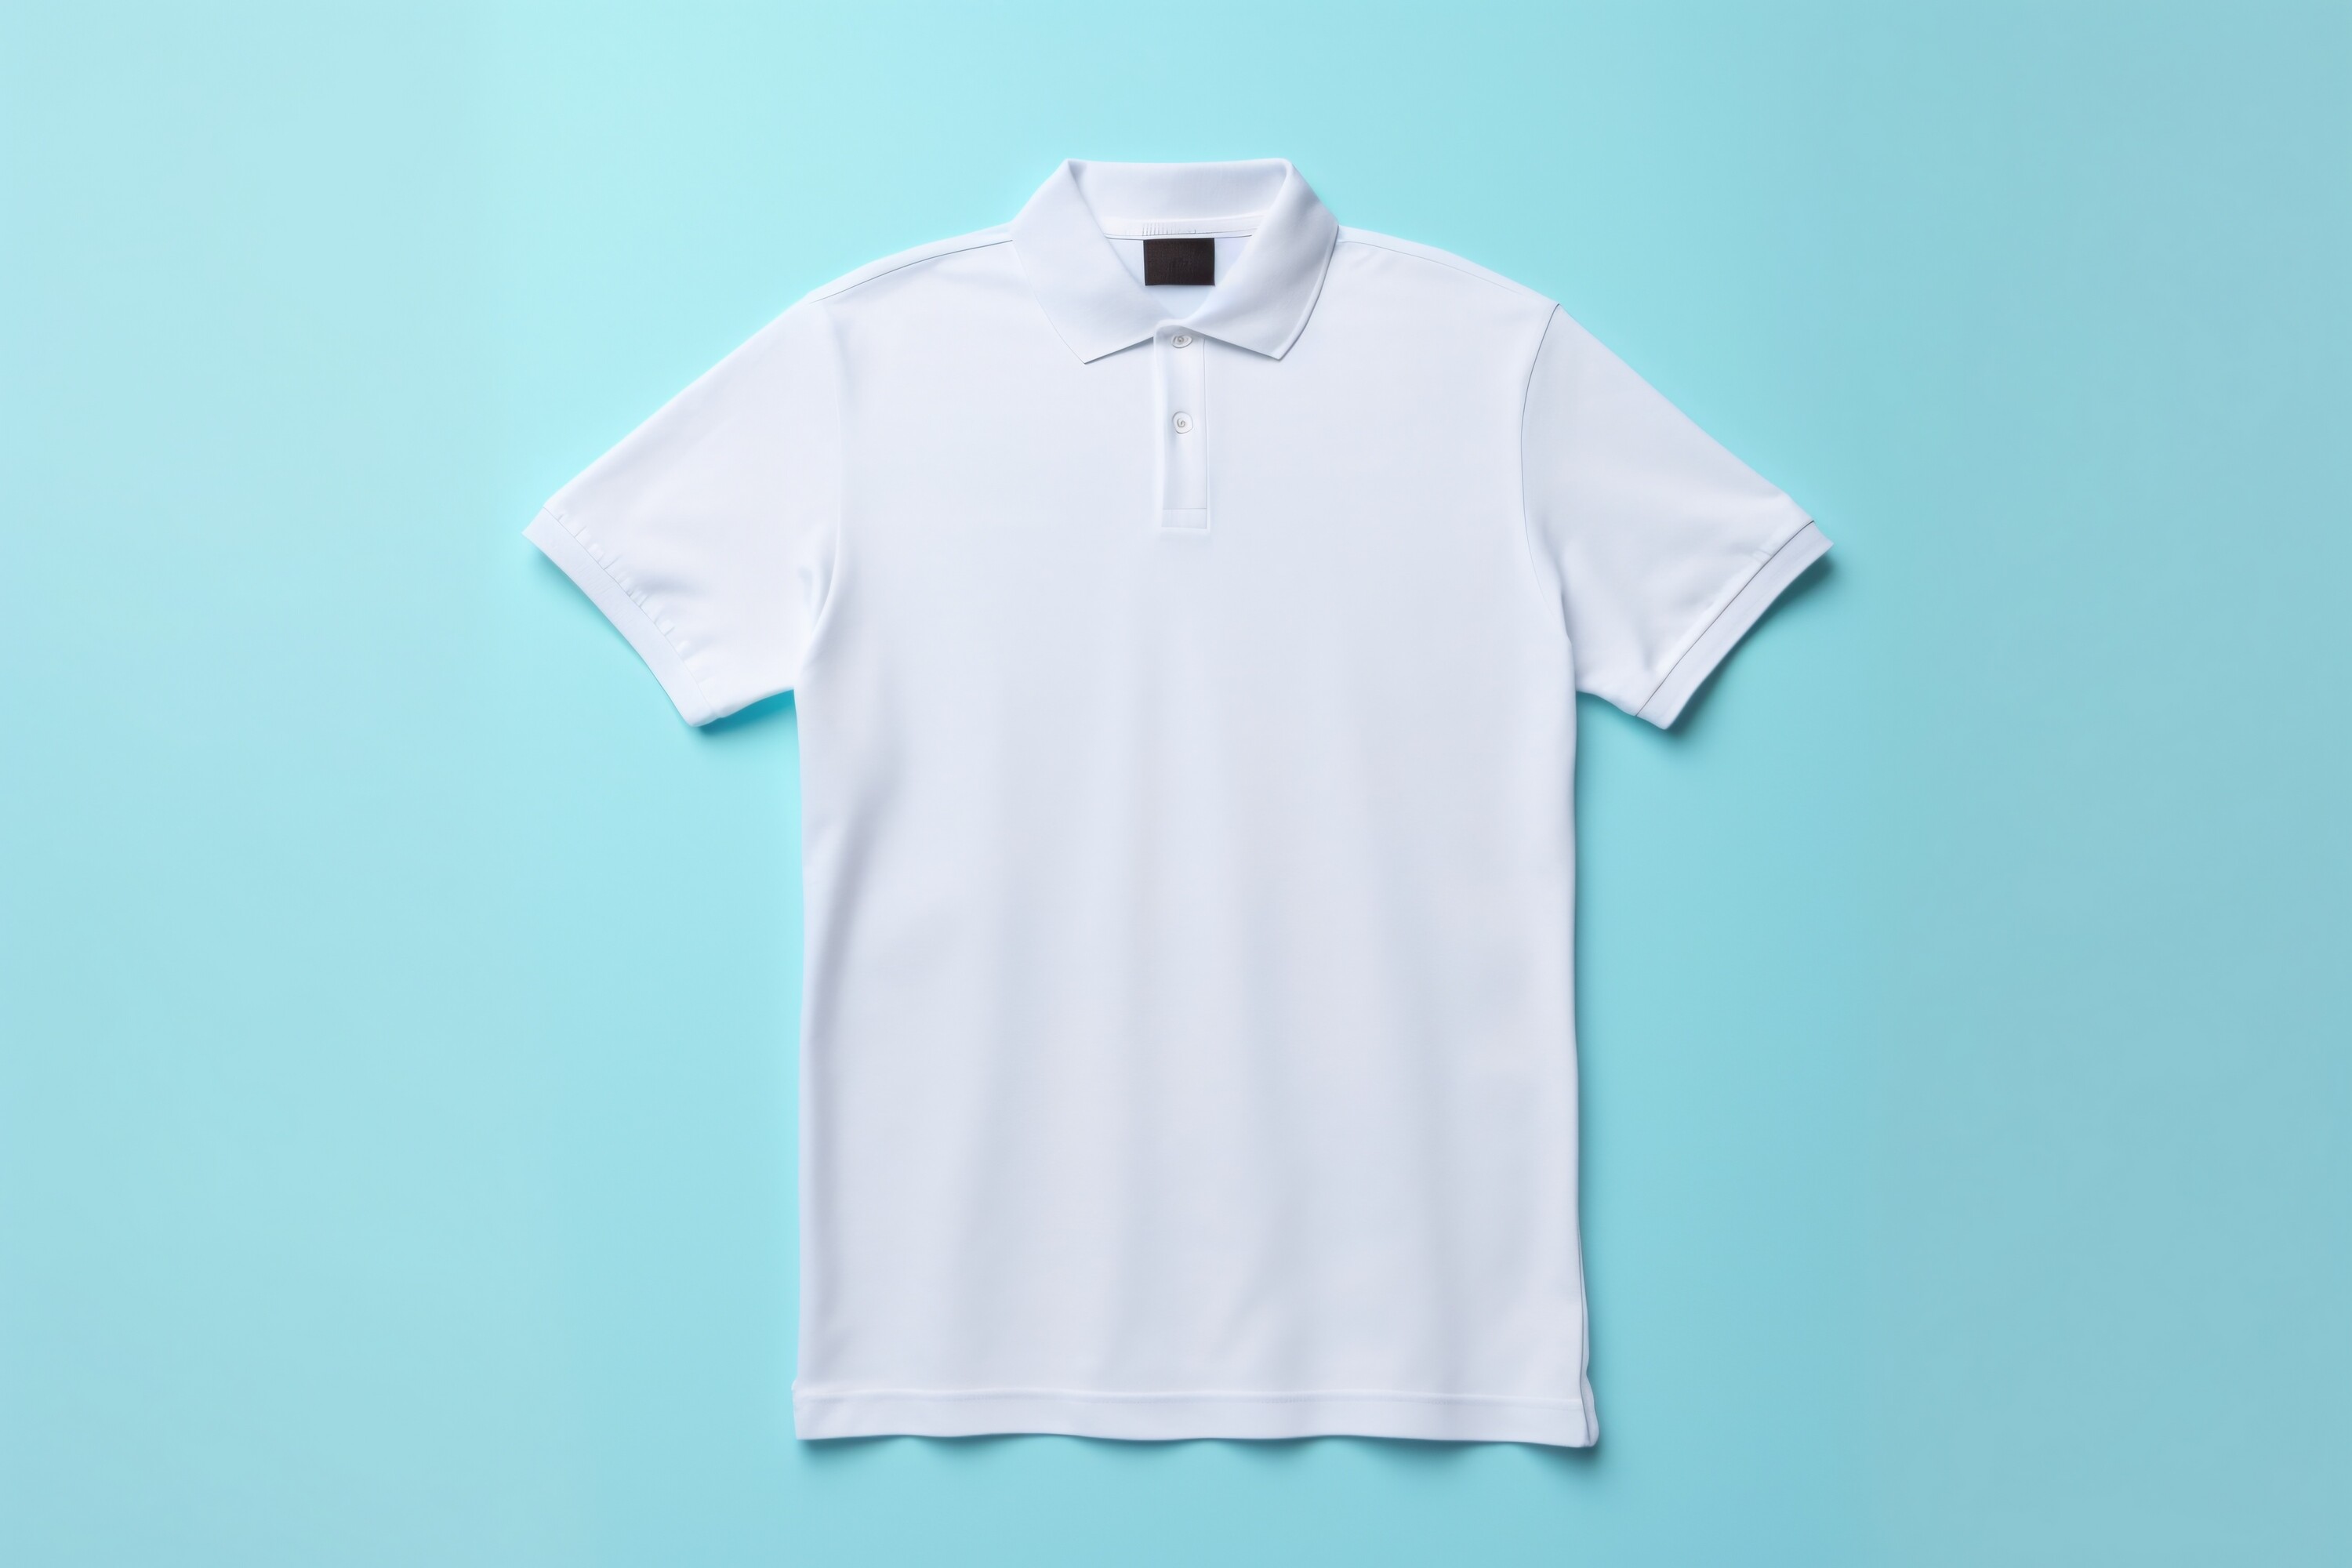 Polo Shirt Mockup Graphic by Forhadx5 · Creative Fabrica